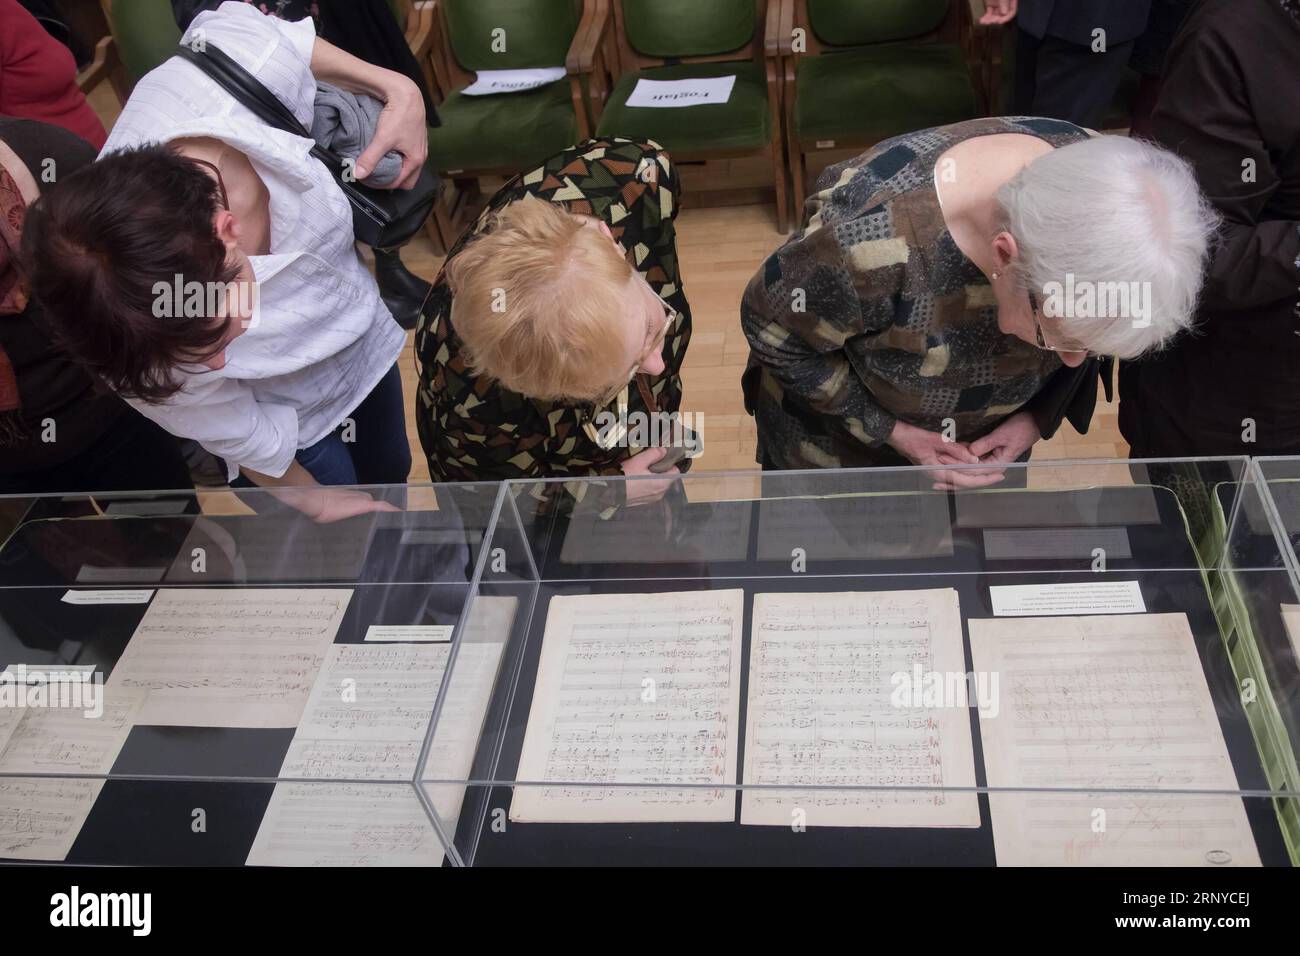 (180311) -- BUDAPEST, March 11, 2018 -- People view Hungarian composer Franz Liszt s manuscripts which are previously thought lost in the Franz Liszt Memorial Museum and Research Center in Budapest, Hungary, on March 10, 2018. The manuscripts believed to be of famous Hungarian composer Franz Liszt were presented in the museum on Saturday in a solemn ceremony.)(gj) HUNGARY-BUDAPEST-LISZT-MANUSCRIPTS AttilaxVolgyi PUBLICATIONxNOTxINxCHN Stock Photo